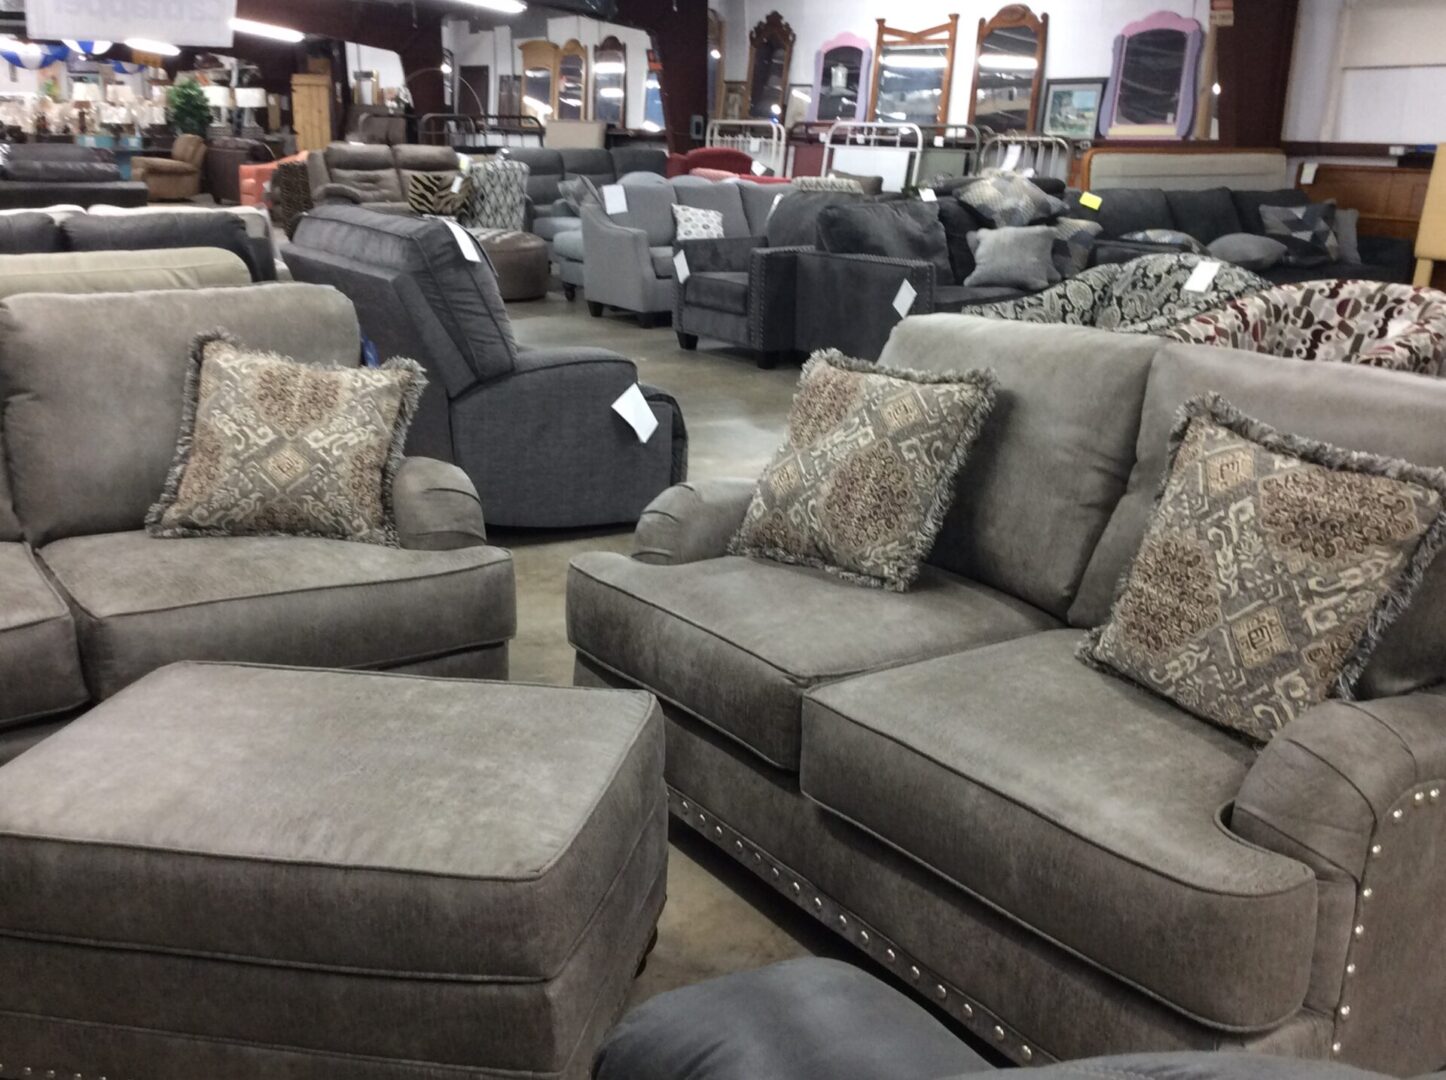 gray couches with throw pillows and other furniture